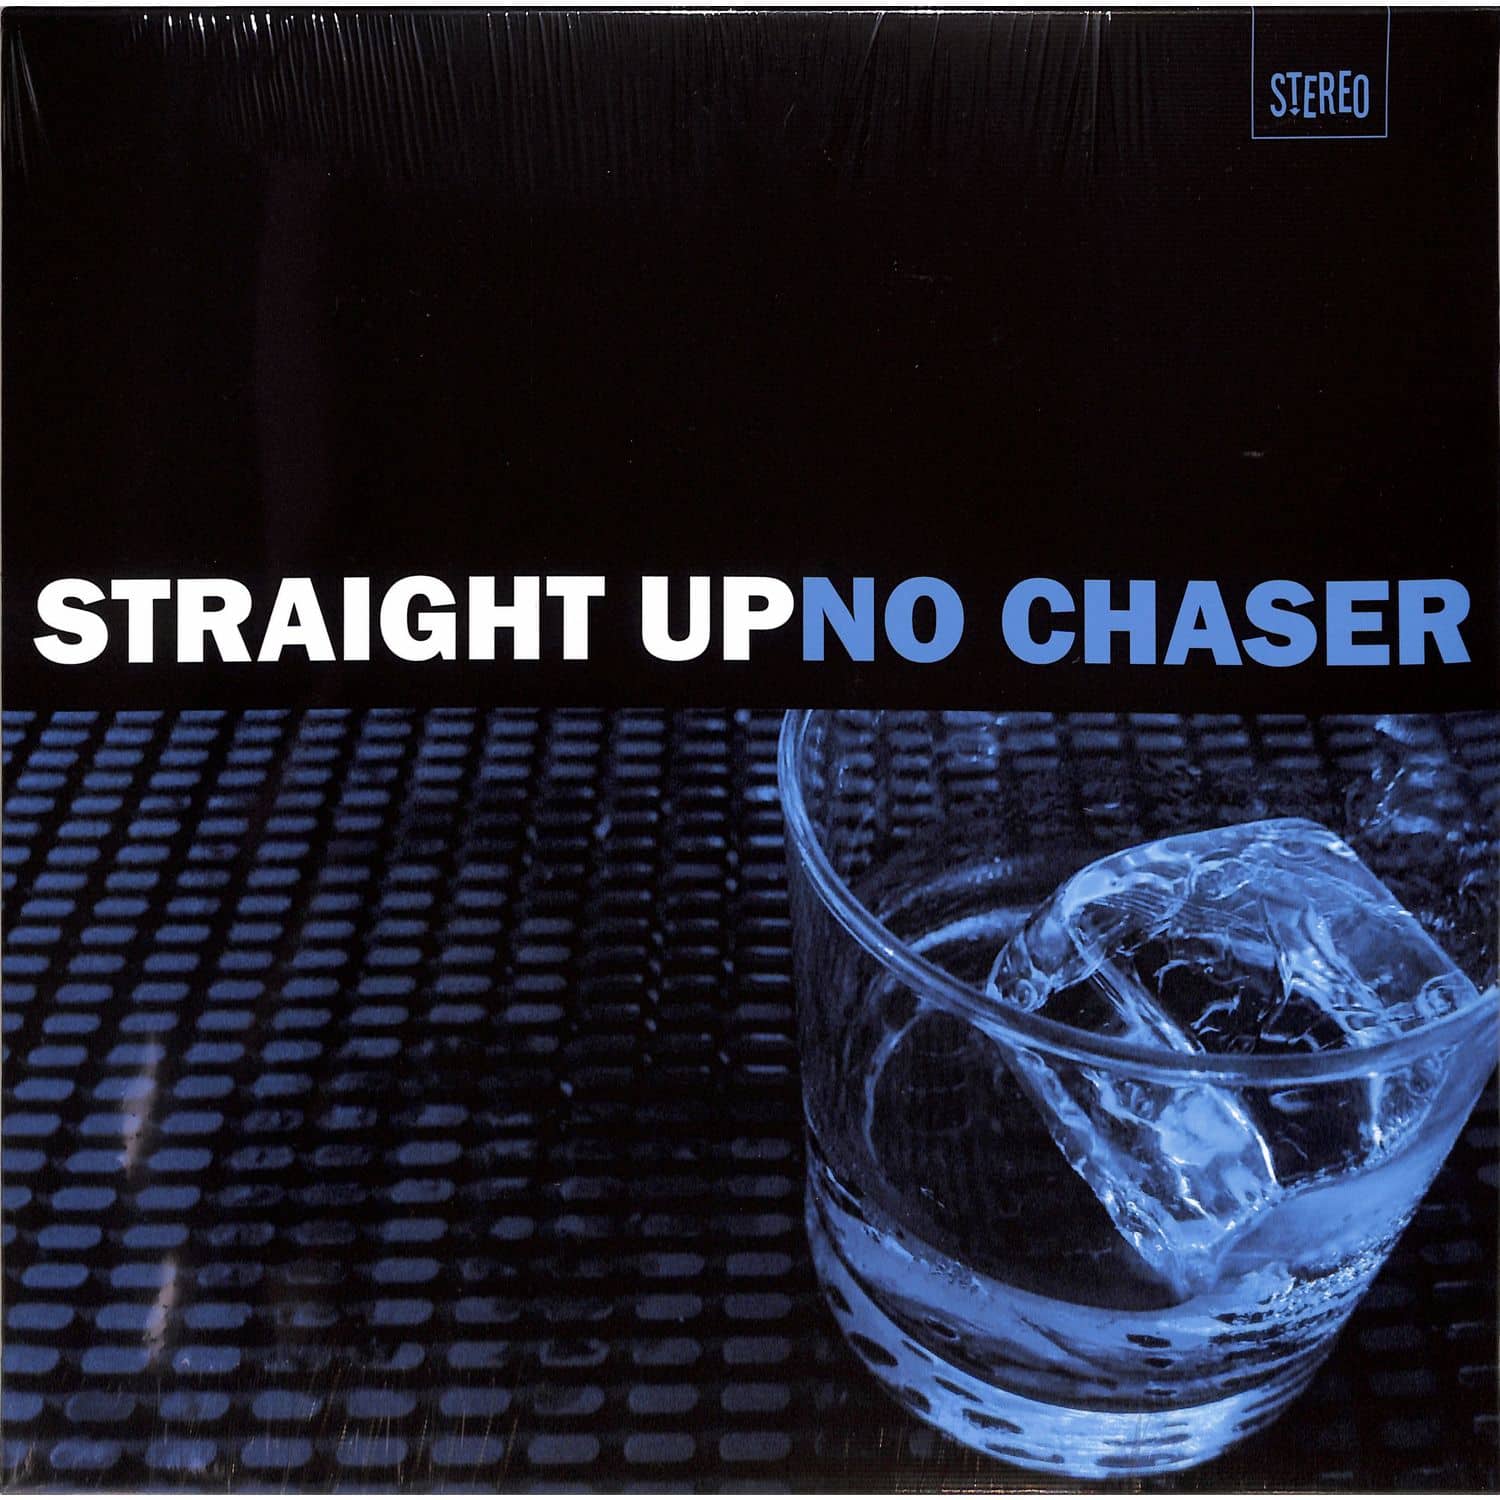 Delano Smith & Norm Talley - STRAIGHT UP NO CHASER 